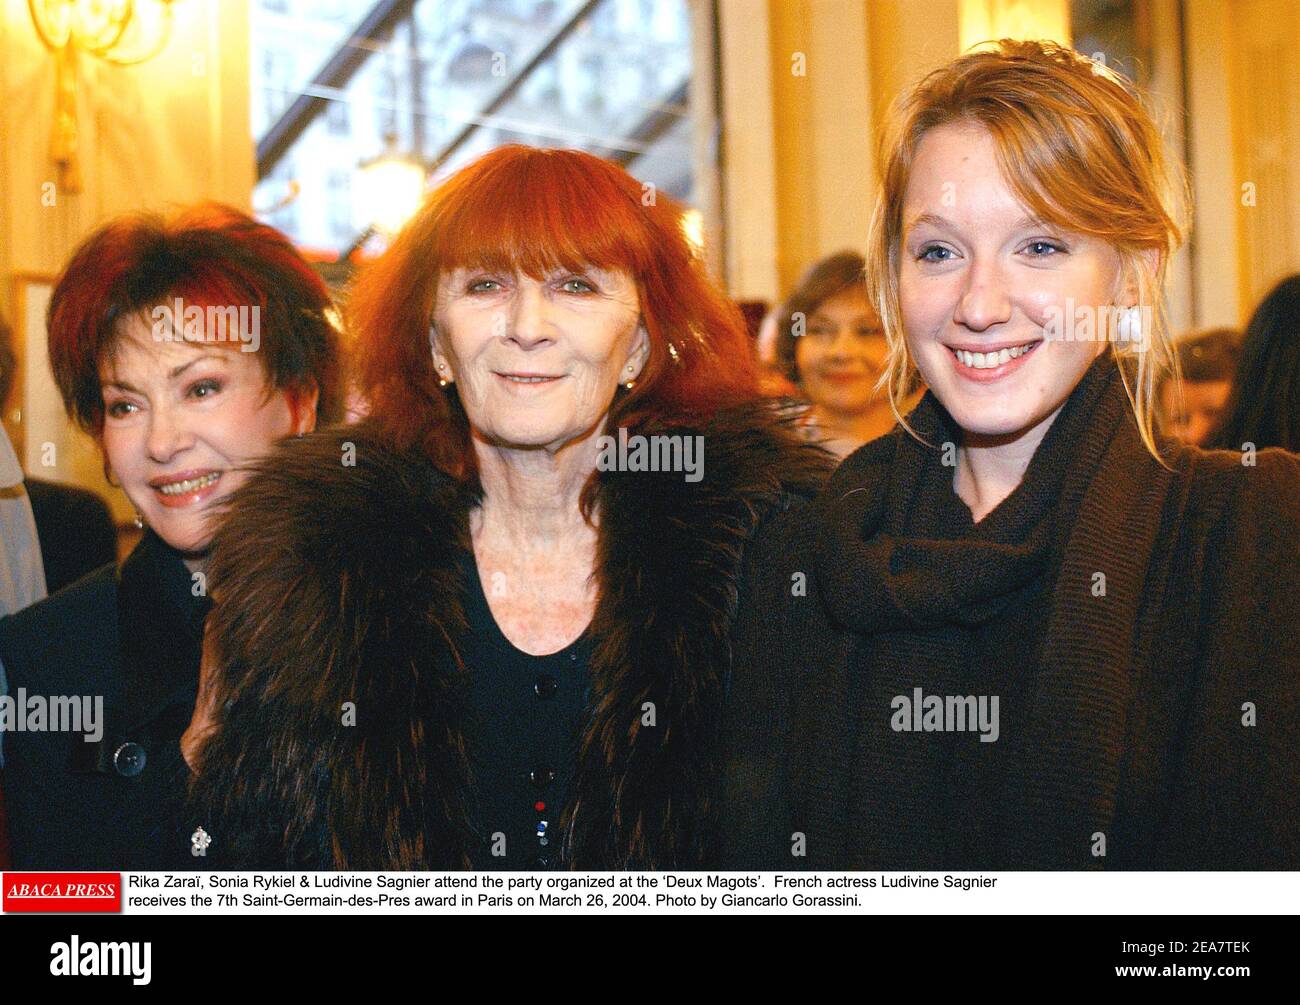 Rika Zara•, Sonia Rykiel & Ludivine Sagnier attend the party organized at  the ïDeux Magots'. French actress Ludivine Sagnier receives the 7th Saint- Germain-des-Pres award in Paris on March 26, 2004. Photo by